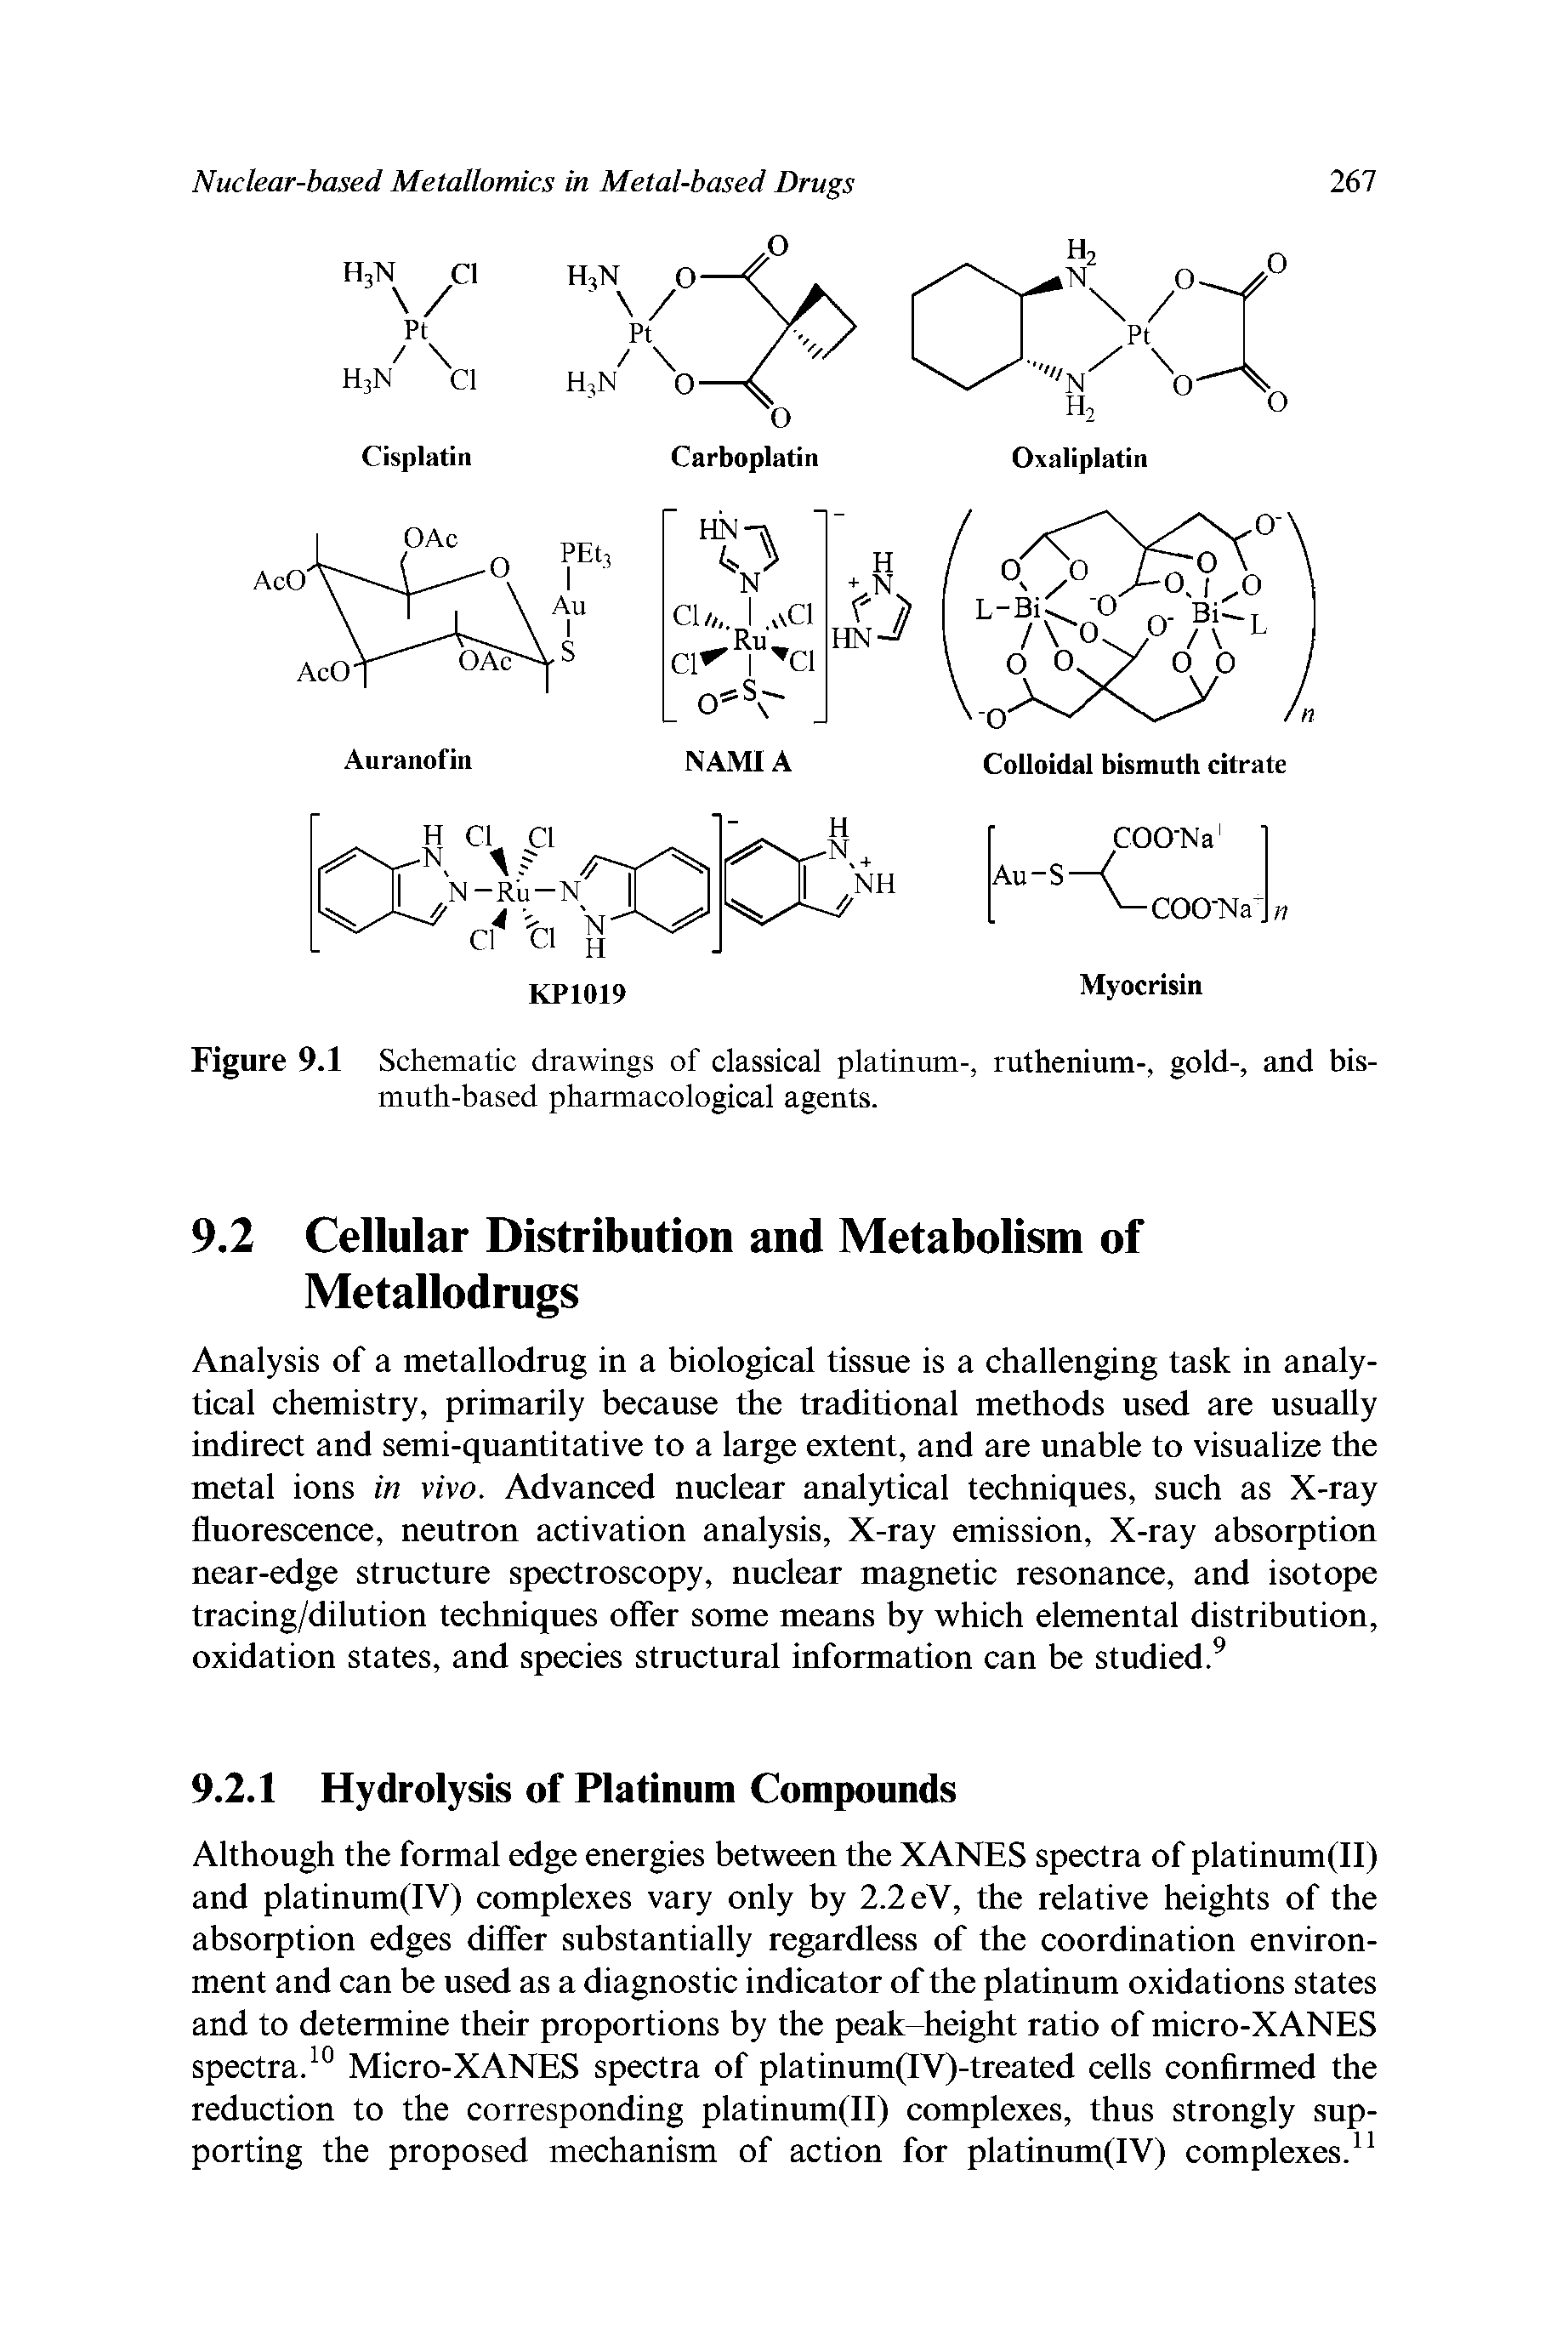 Figure 9.1 Schematic drawings of classical platinum-, ruthenium-, gold-, and bismuth-based pharmacological agents.